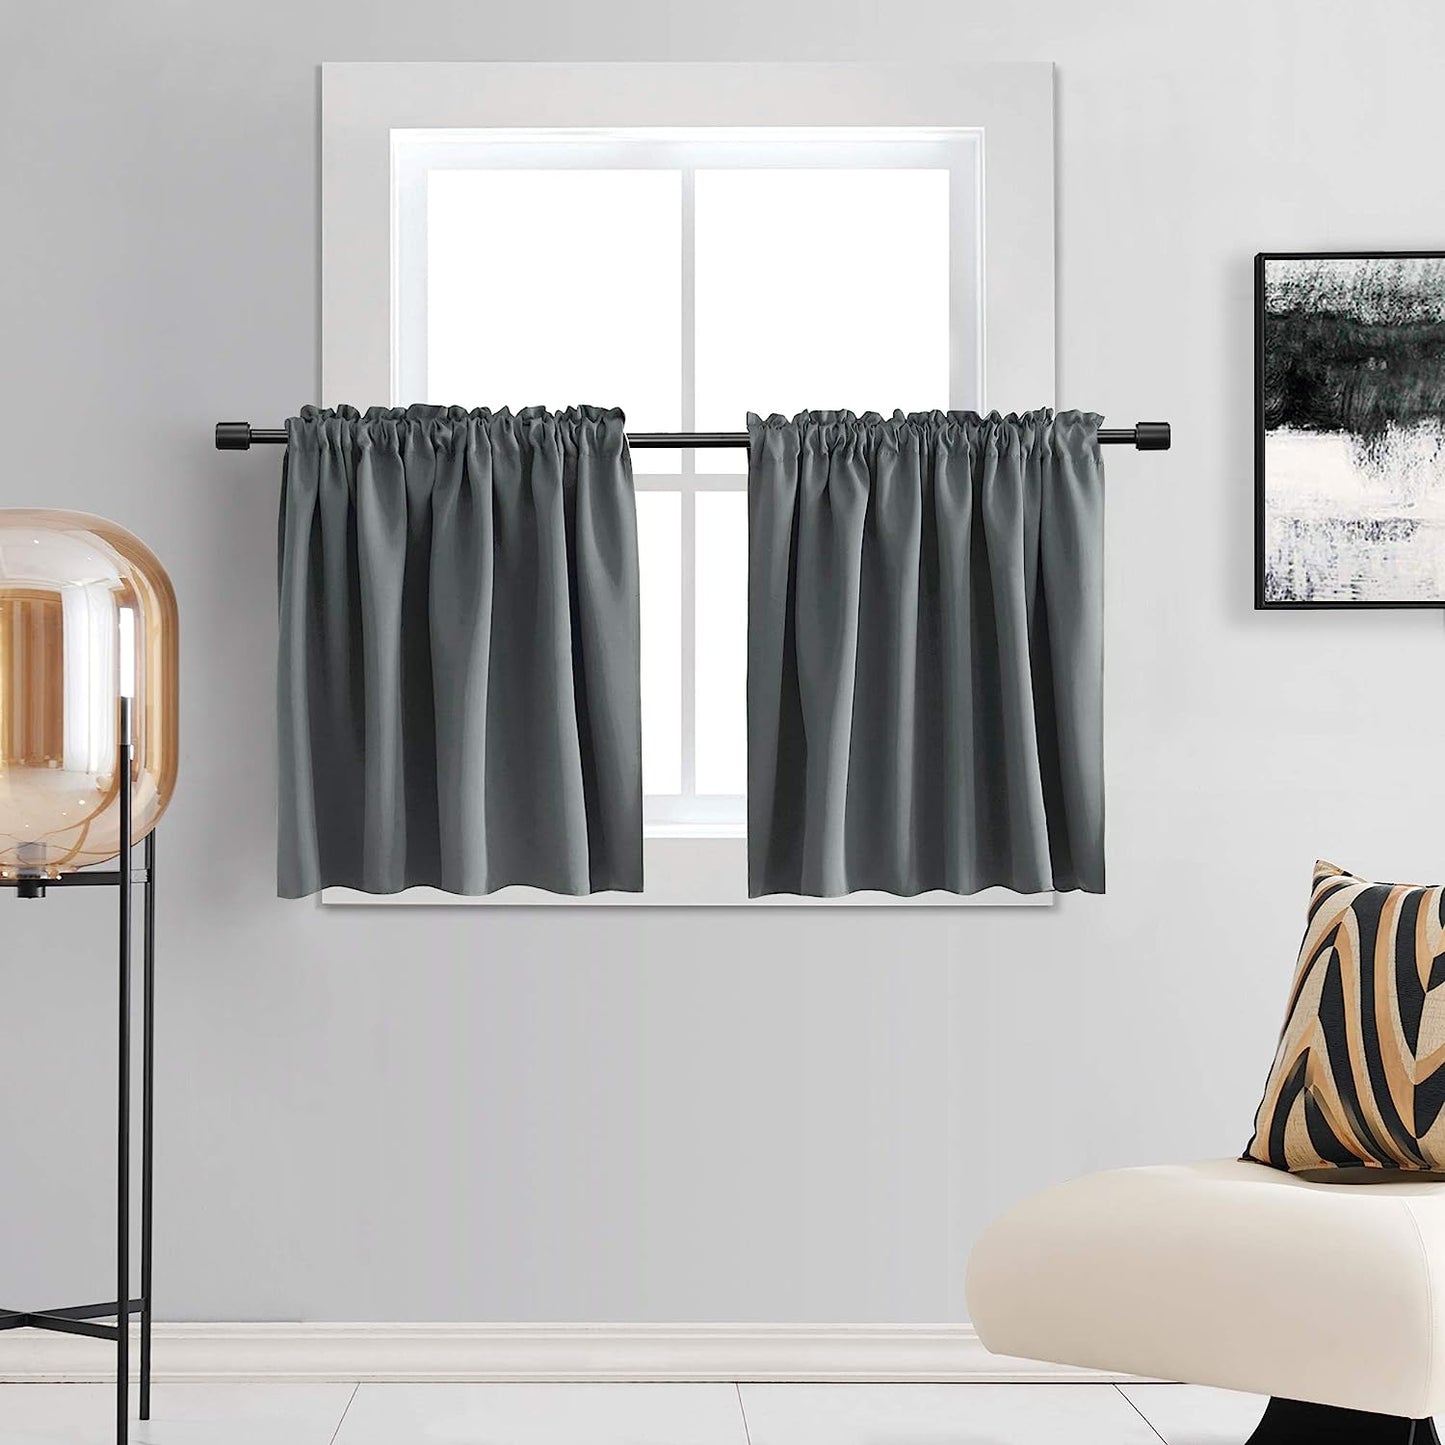 DONREN 24 Inch Length Curtains- 2 Panels Blackout Thermal Insulating Small Curtain Tiers for Bathroom with Rod Pocket (Black,42 Inch Width)  DONREN Medium Grey 42" X 30" 